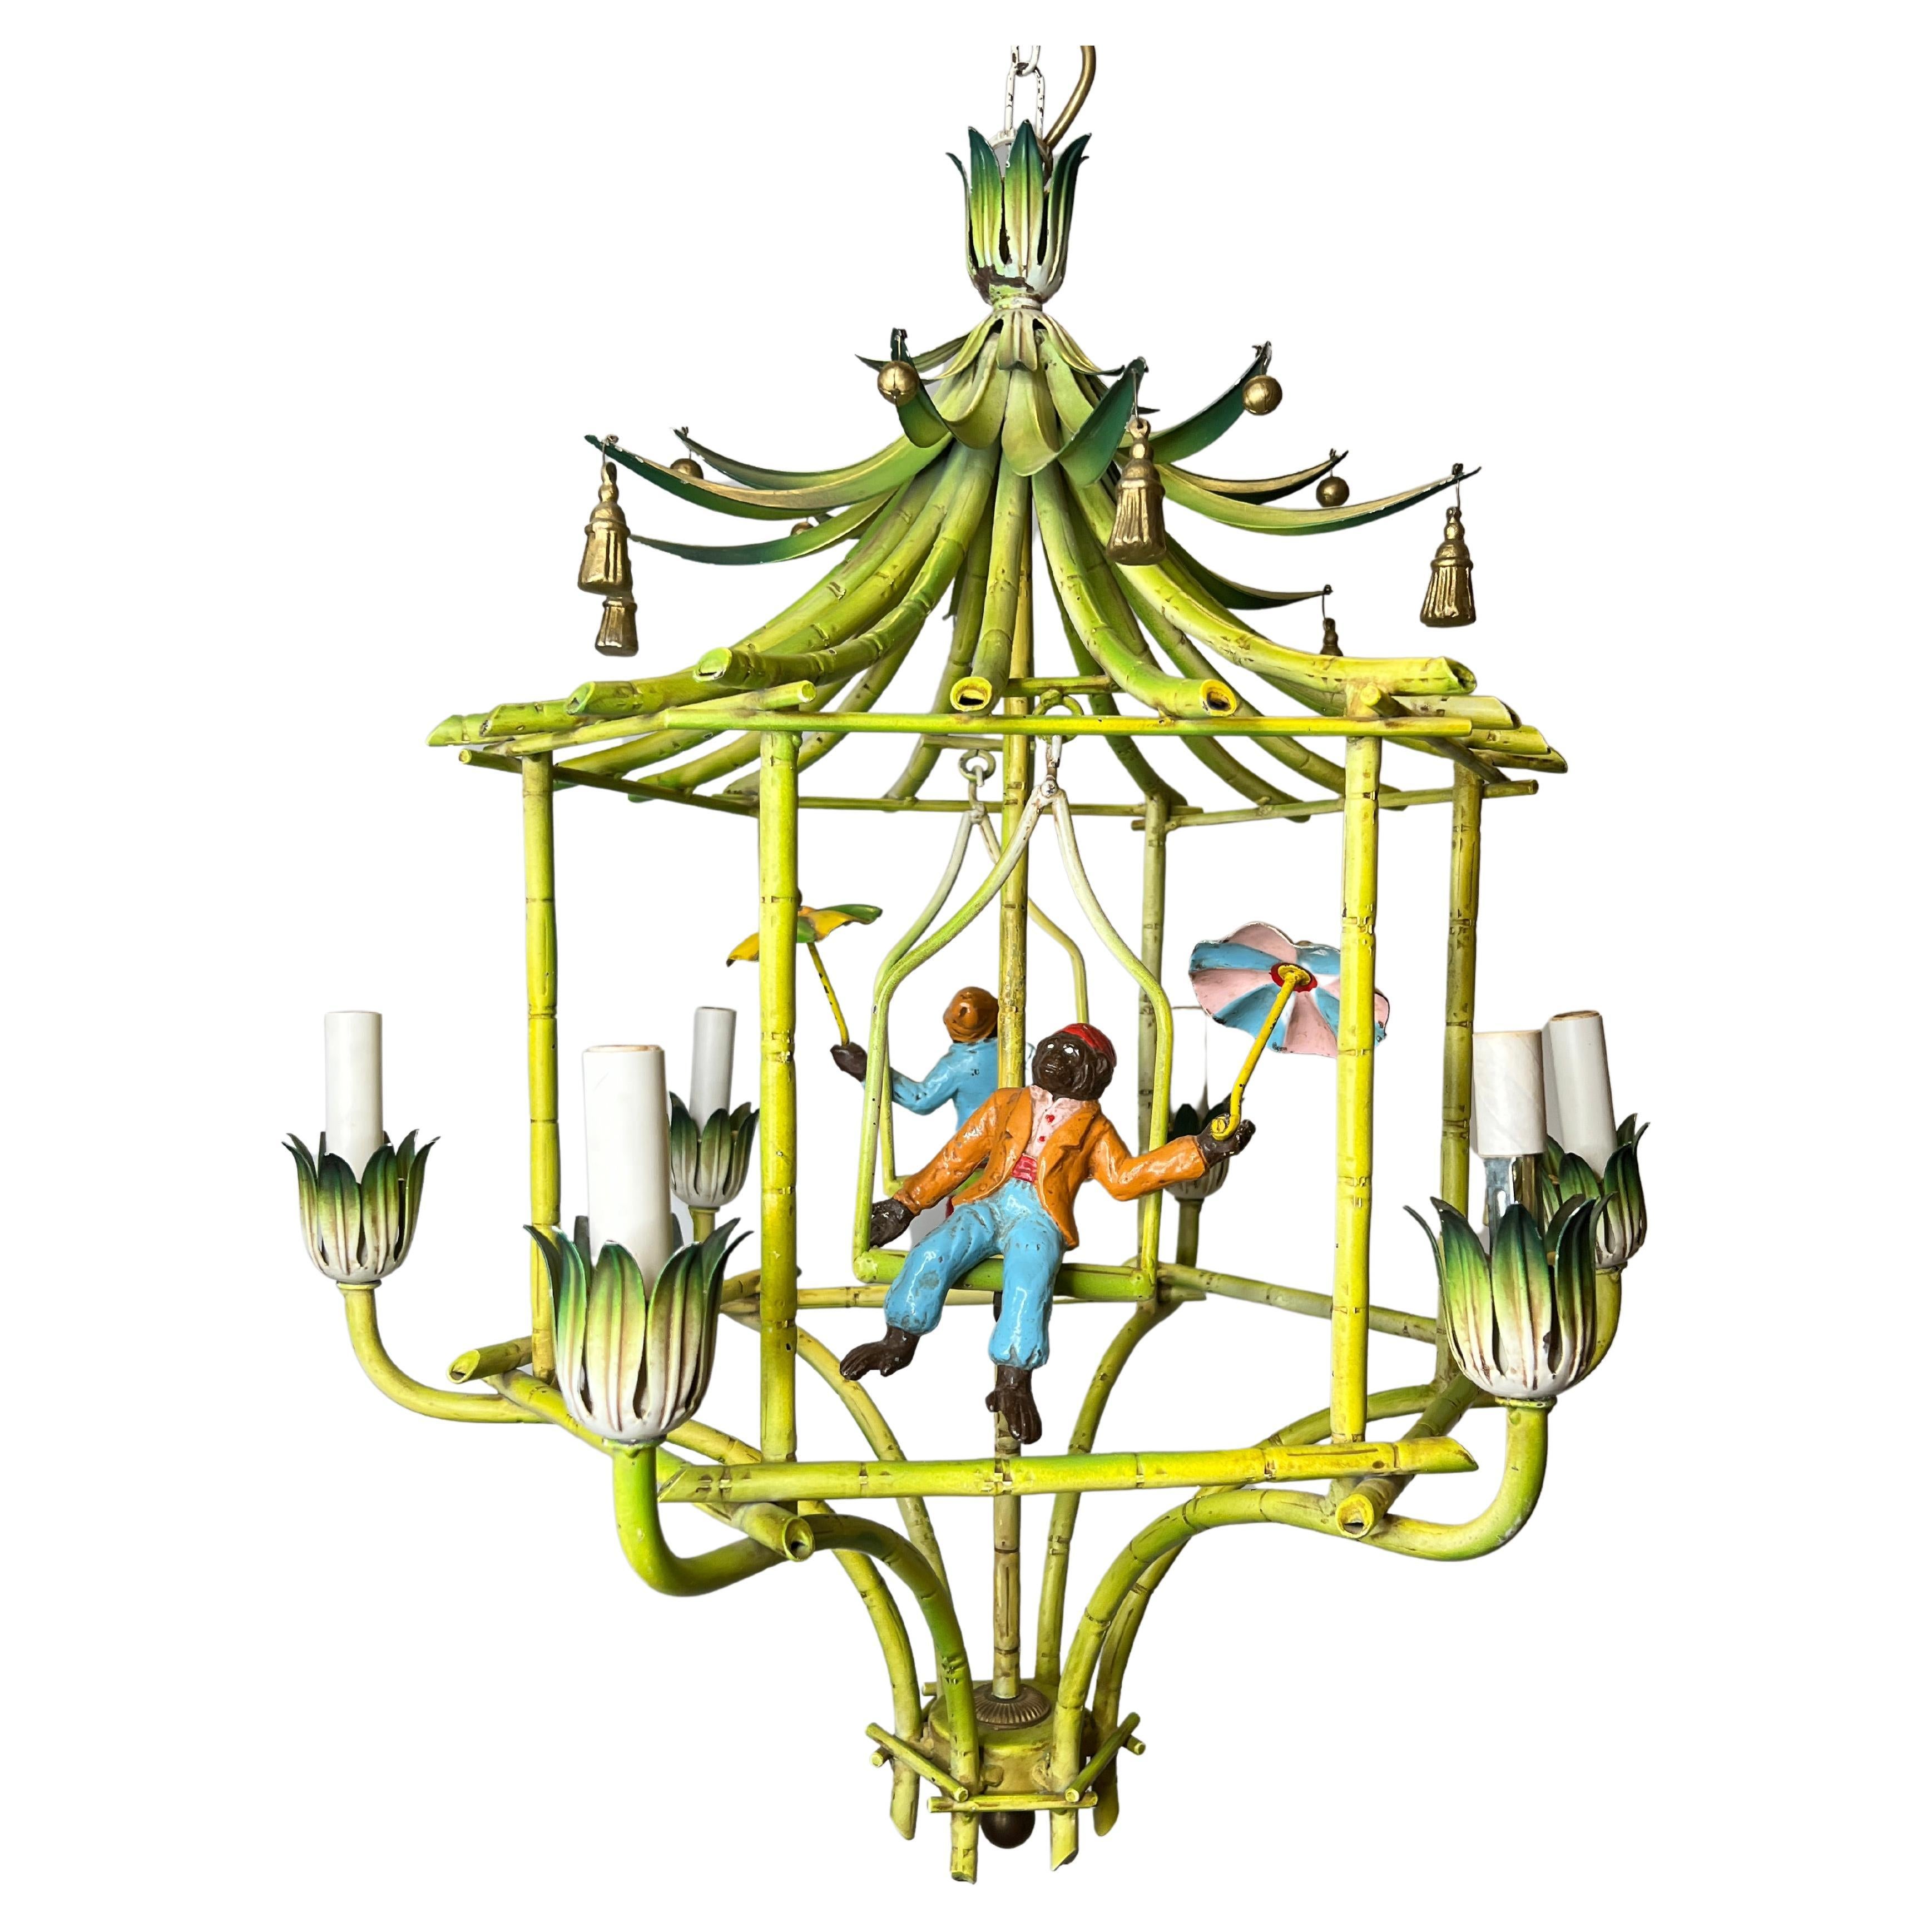 Chinoiserie Polychrome Painted Tole Metal Chandelier with Figural Monkeys